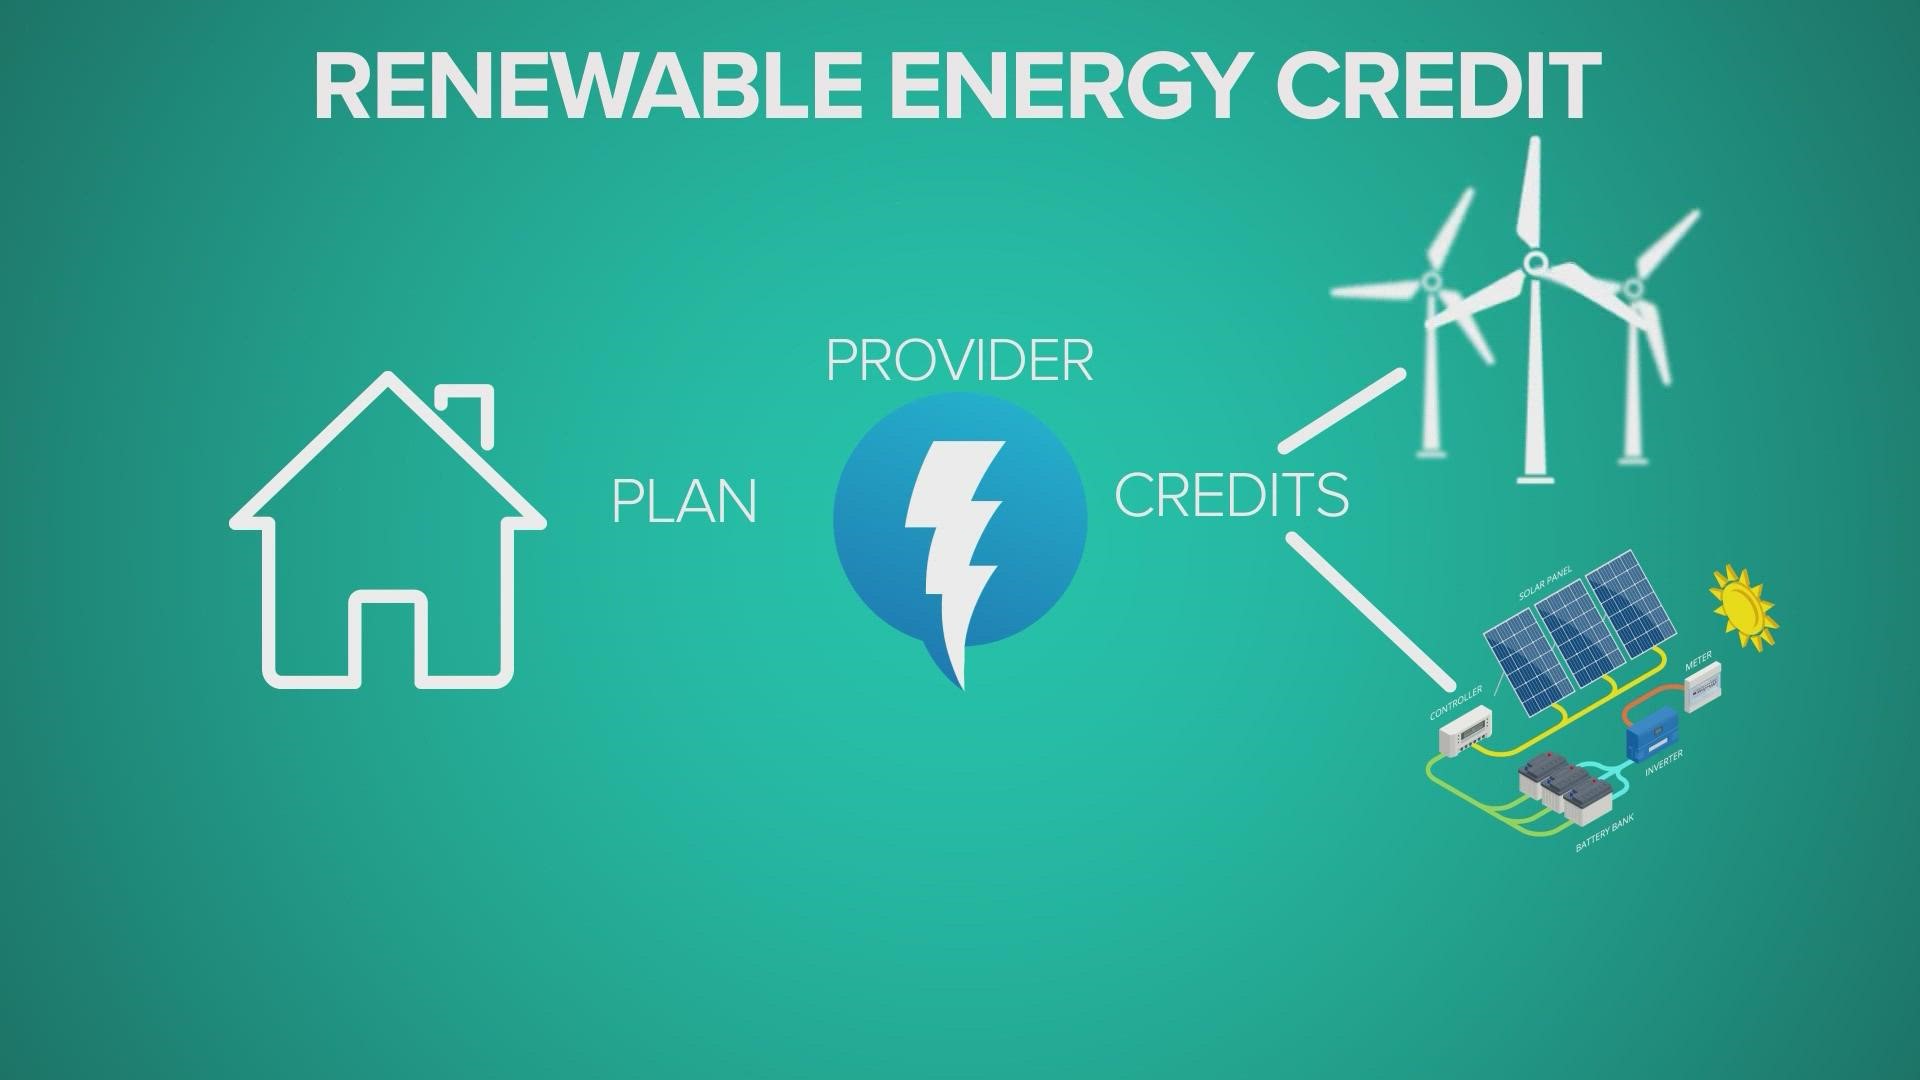 KHOU 11's Tiffany Craig breaks down the process for renewable energy plans in Texas.